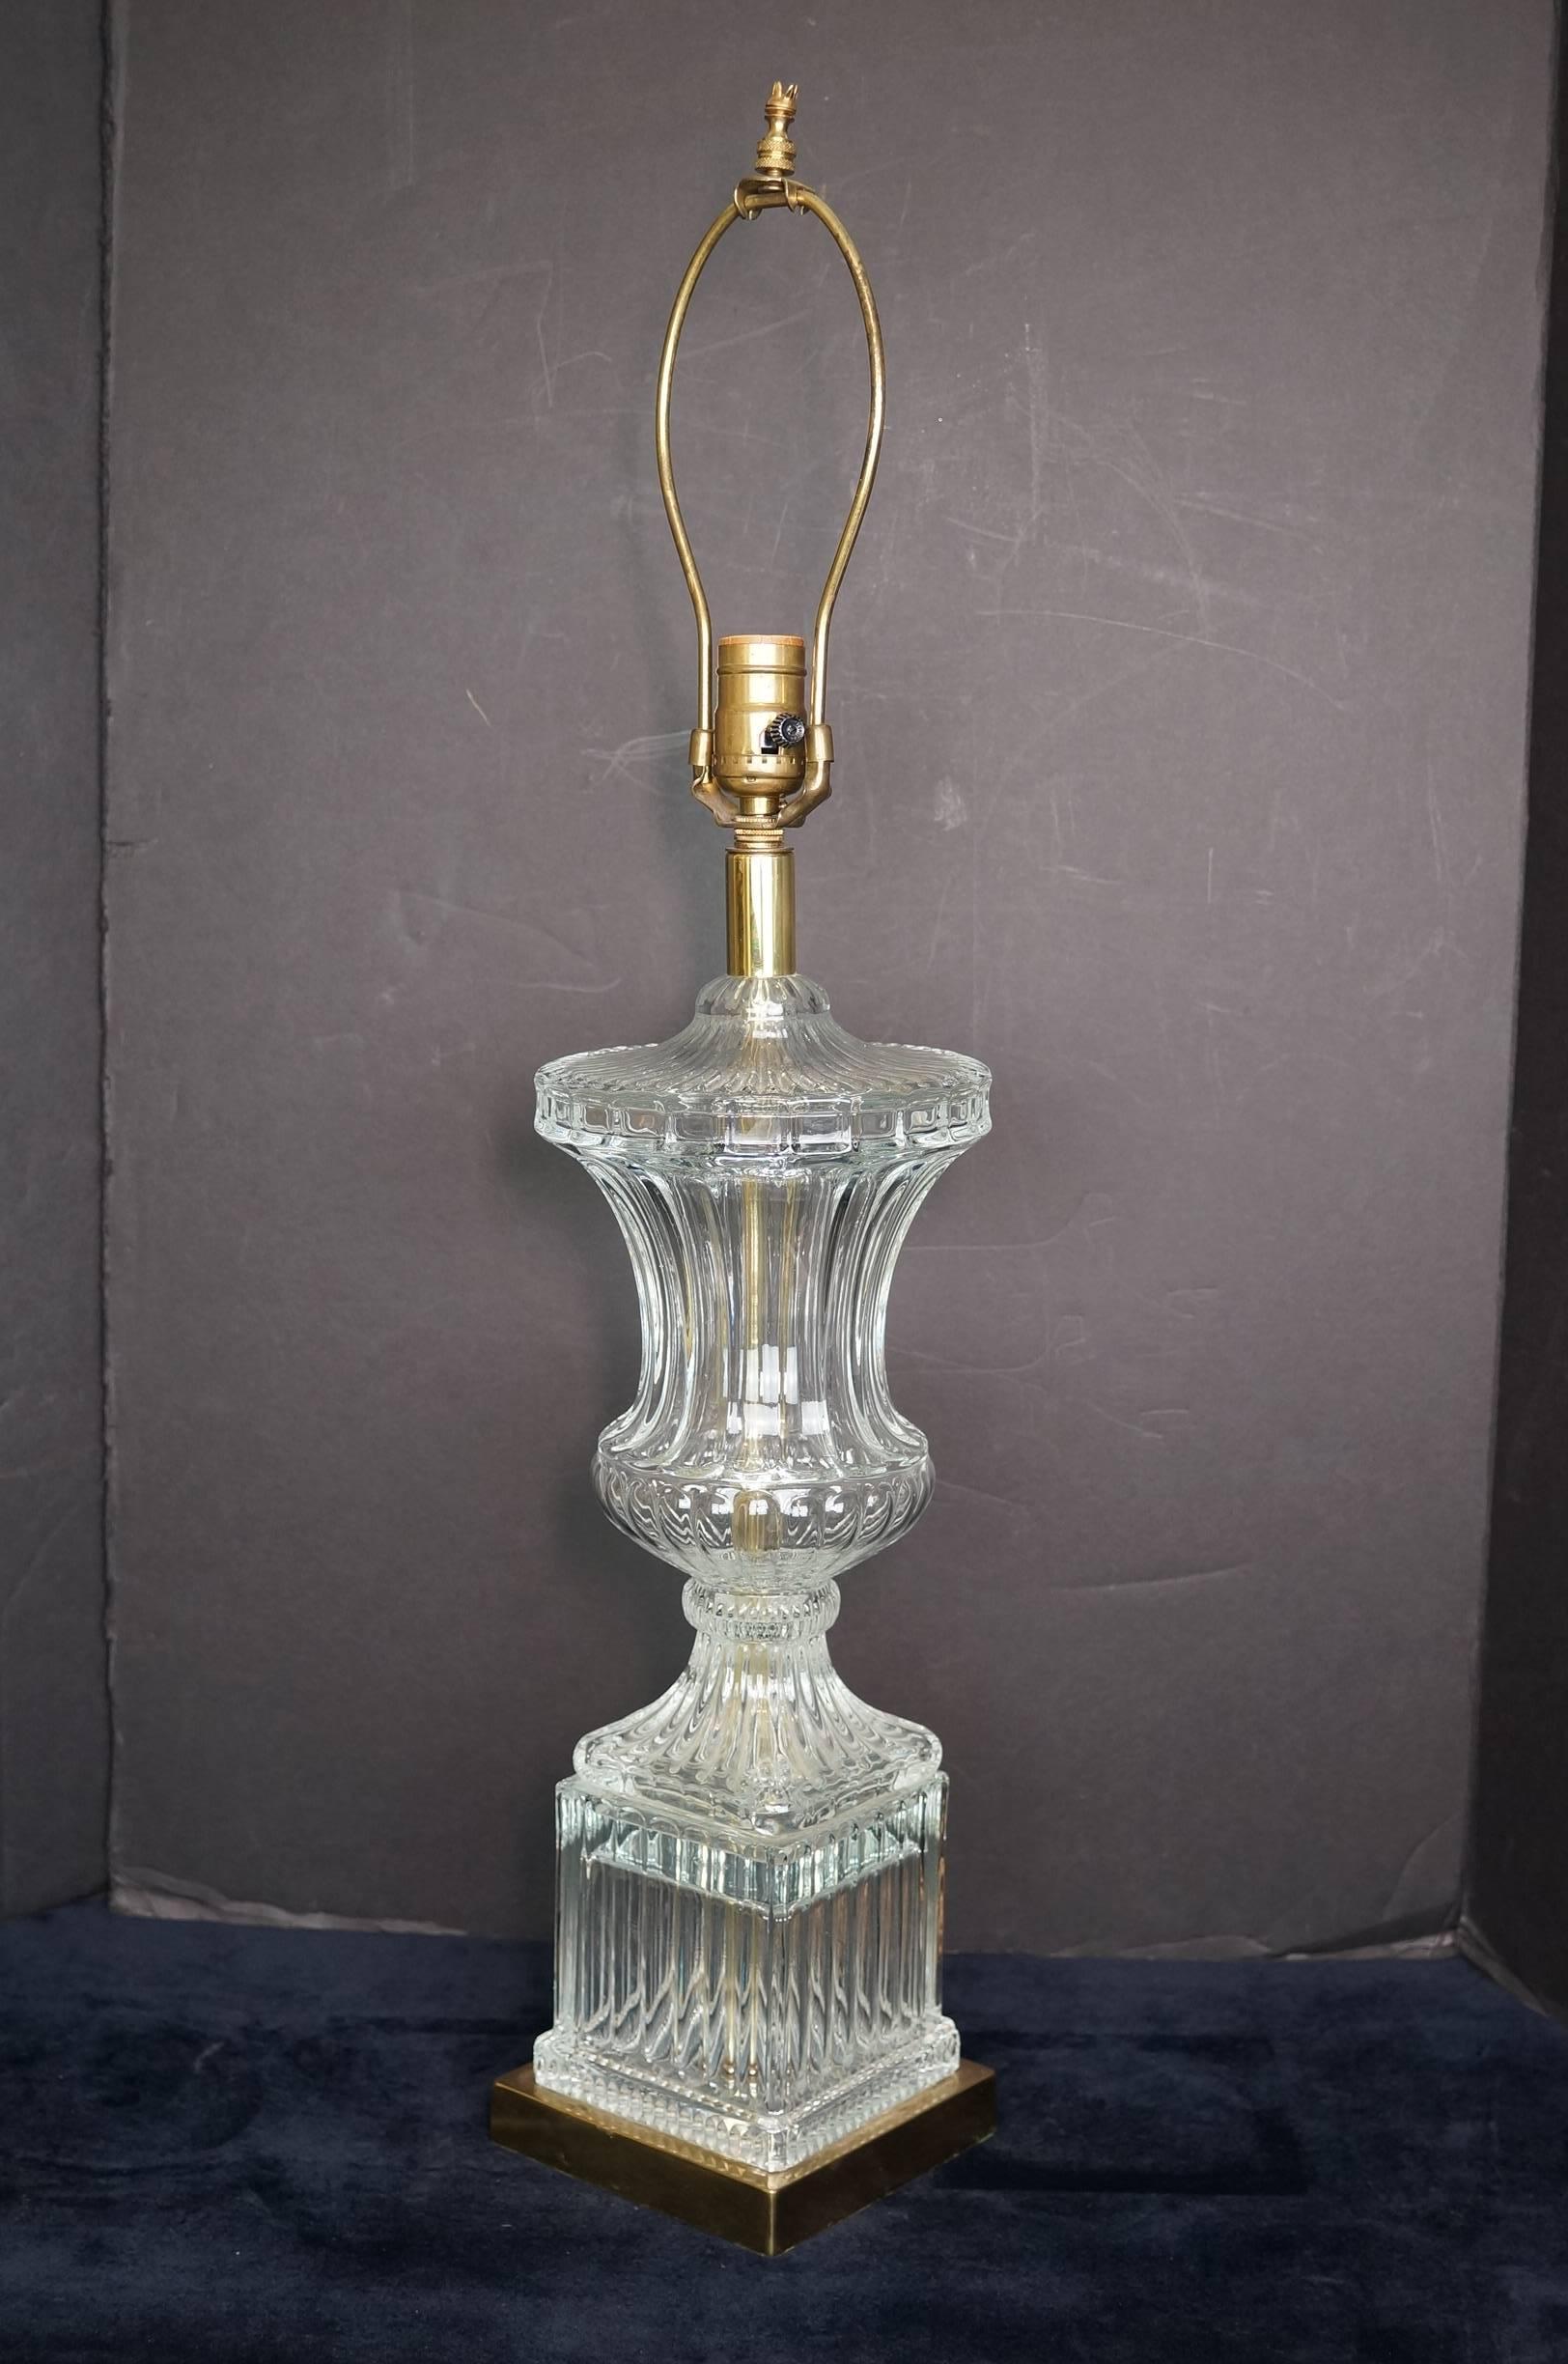 Pair of clear glass Baccarat style Campana form urn table lamps
Stock number: LL40.